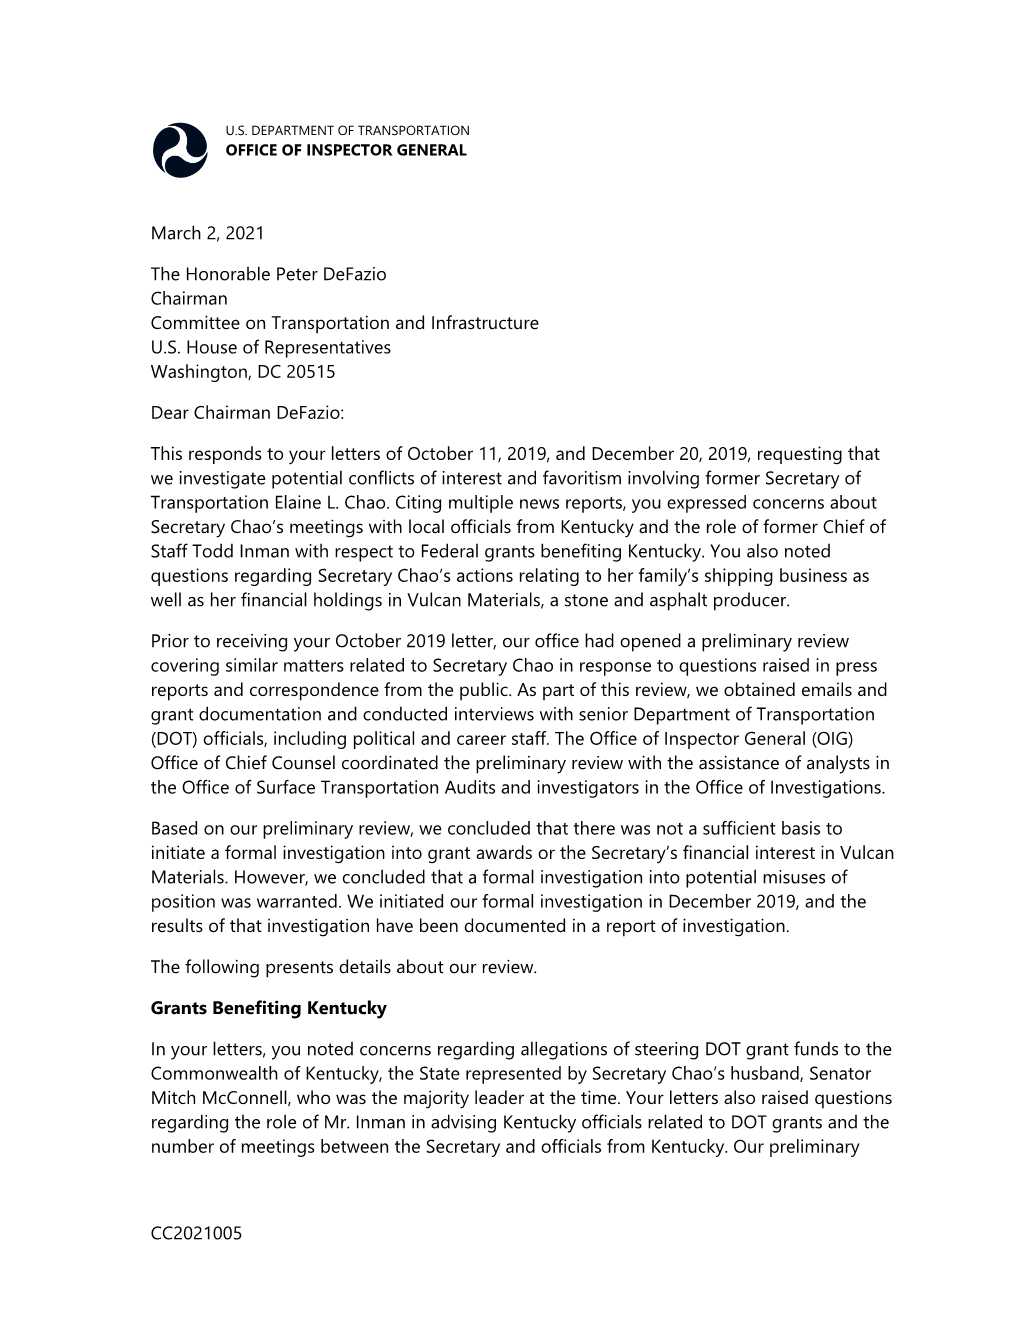 Letter to Chairman Defazio Regarding Potential Conflicts Of